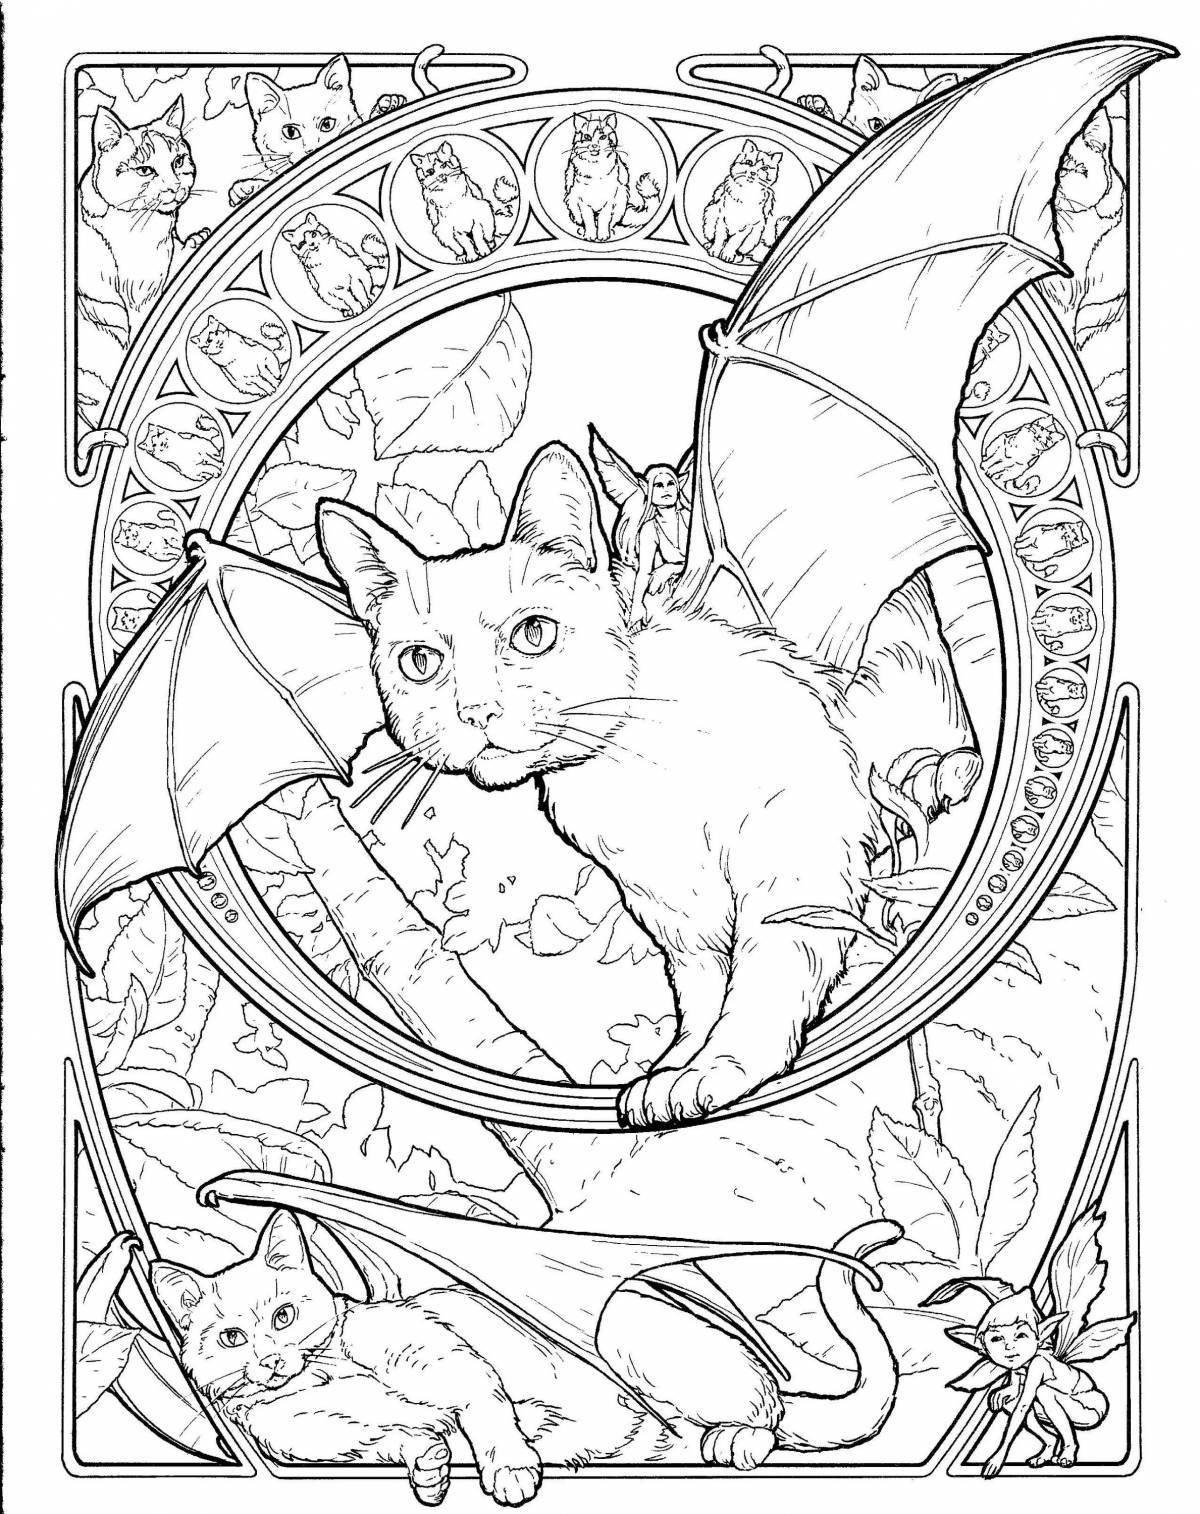 Exalted magical animals coloring book